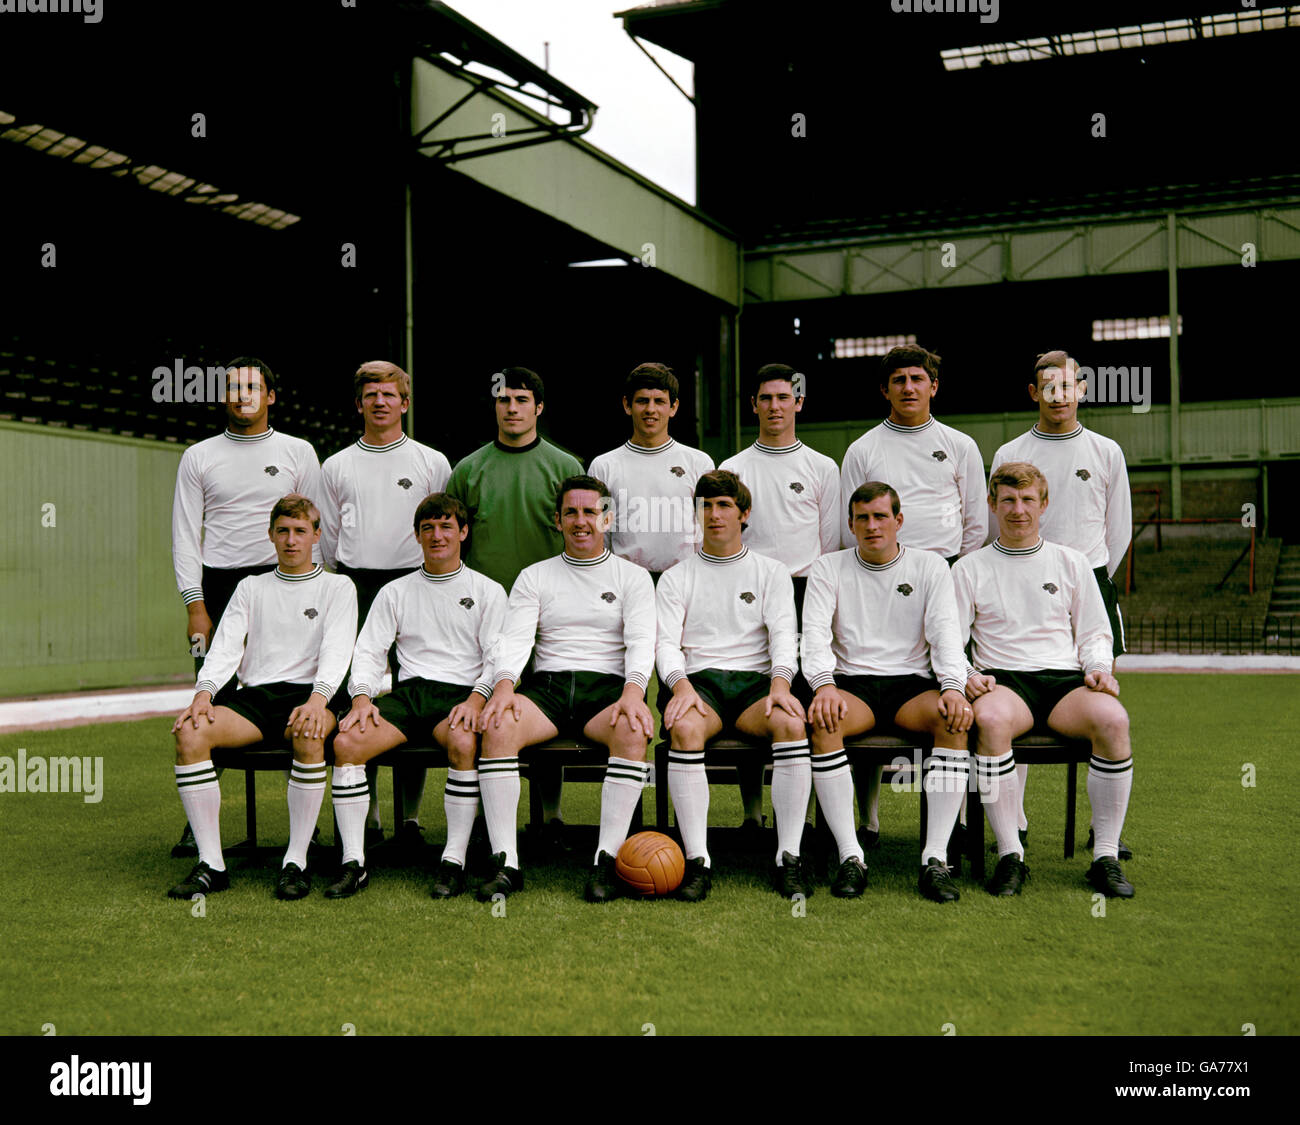 Derby County Football Squad. Back Row: f. Wignall, A. Durban, L. Green, R. Webster, J. Robson, Roy McFarland, J. Walker Front Row: R. Brooks, W. Carlin, Dave Mckay, K. Hector, J. O'Hare, H. Hinton Stock Photo